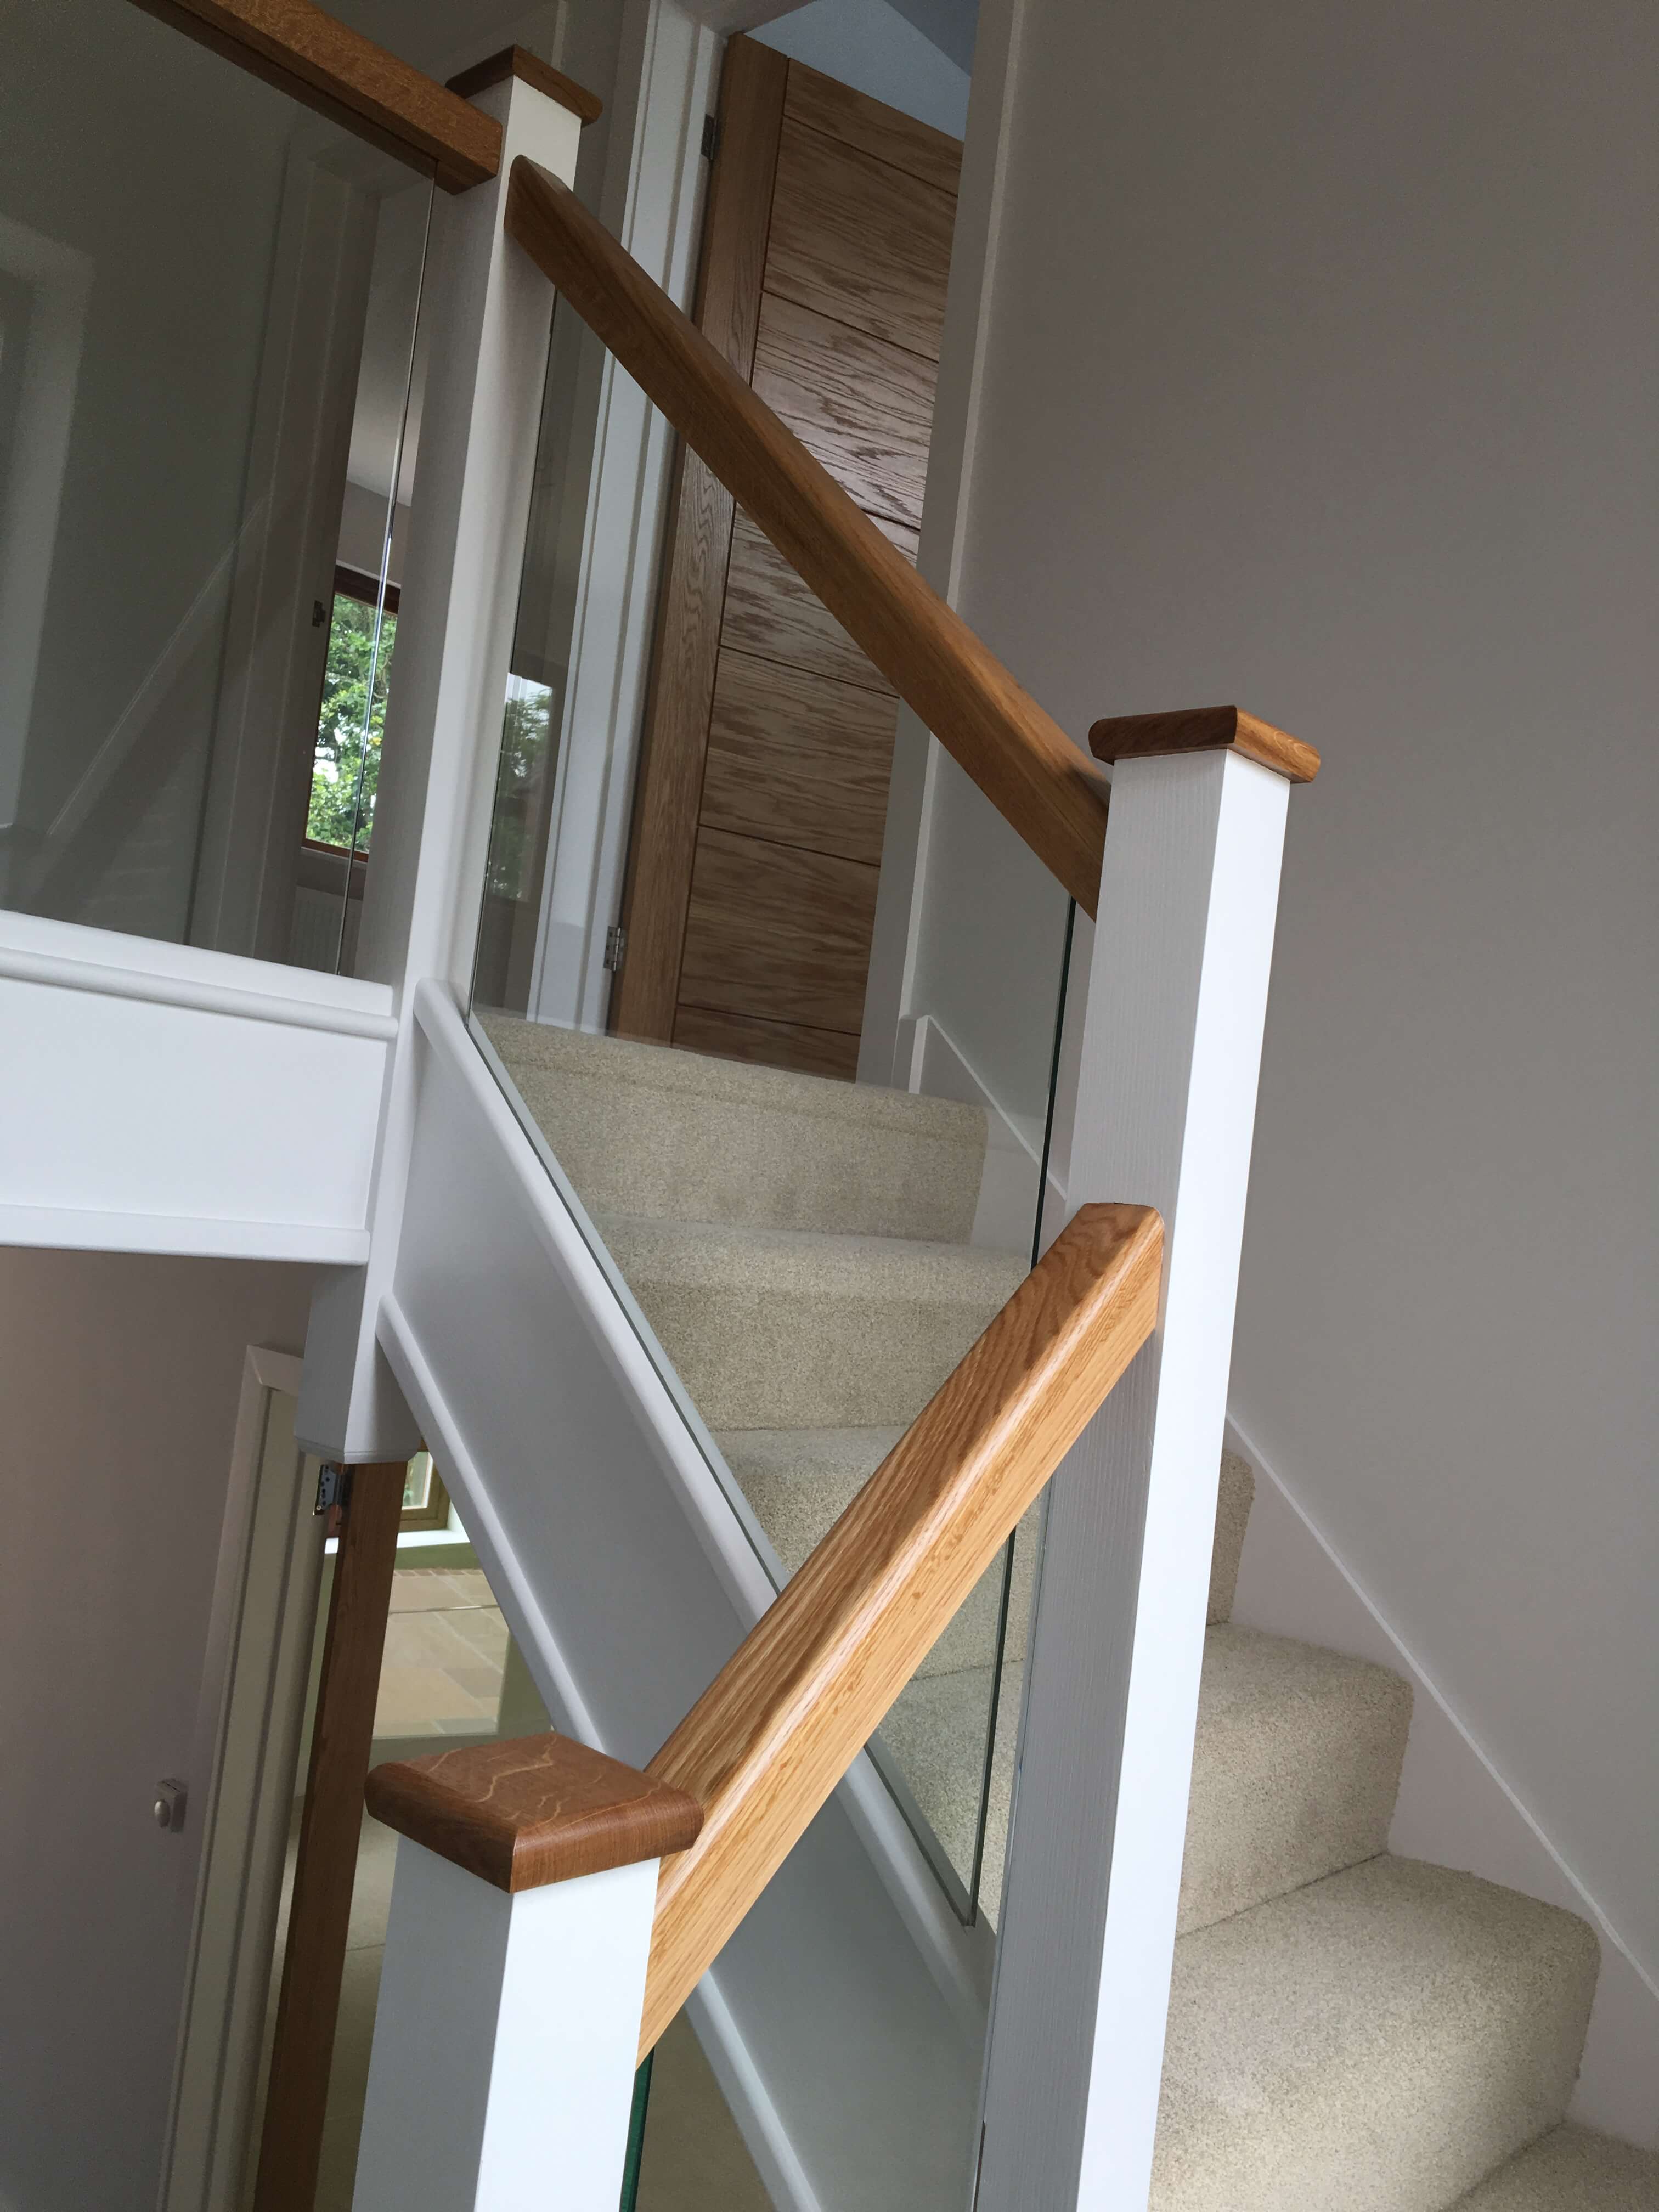 U-bent staircase with glass balusters